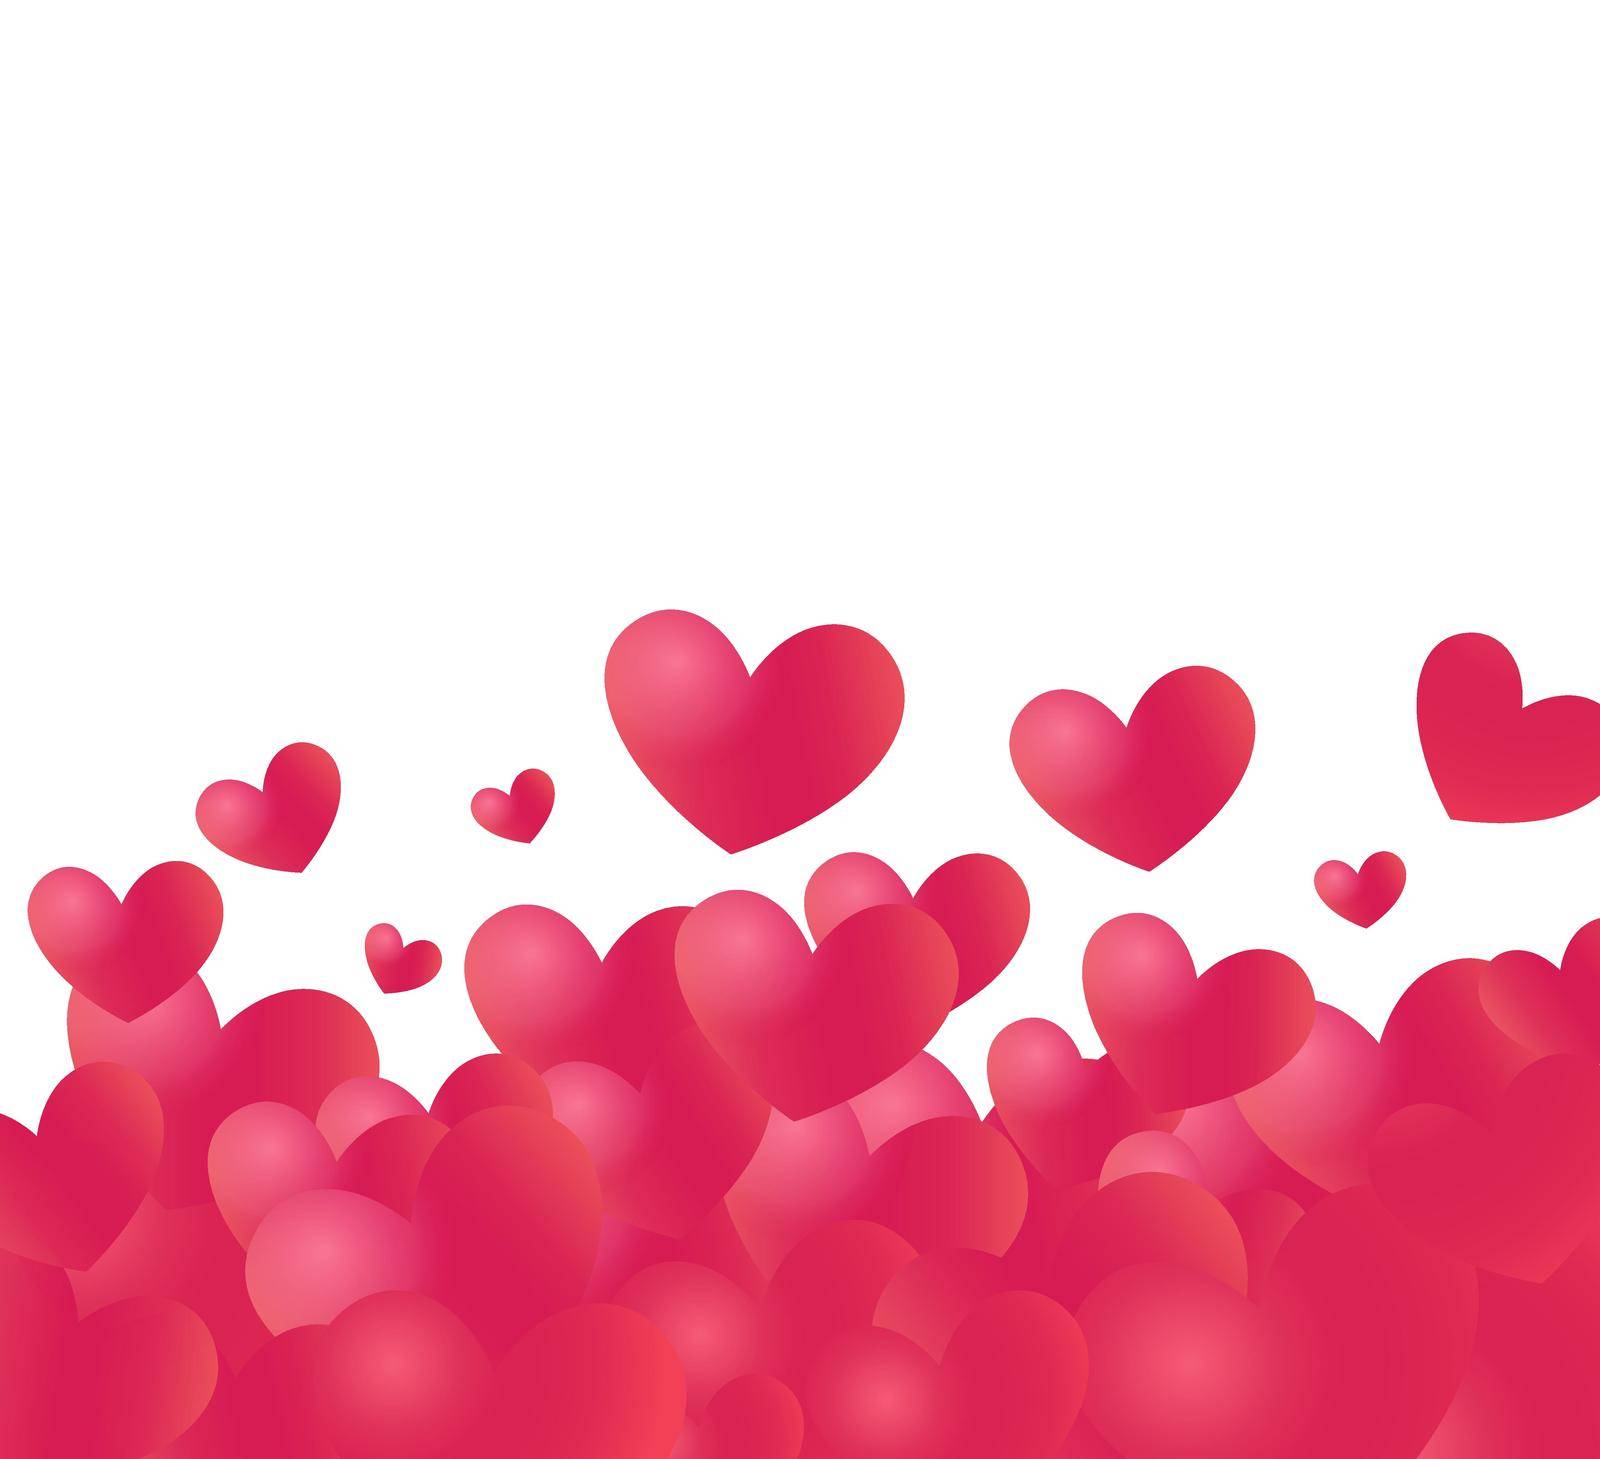 Hearts backdrop footer with white copy space at top. Pink Mock up for Valentines Day or Wedding decoration.